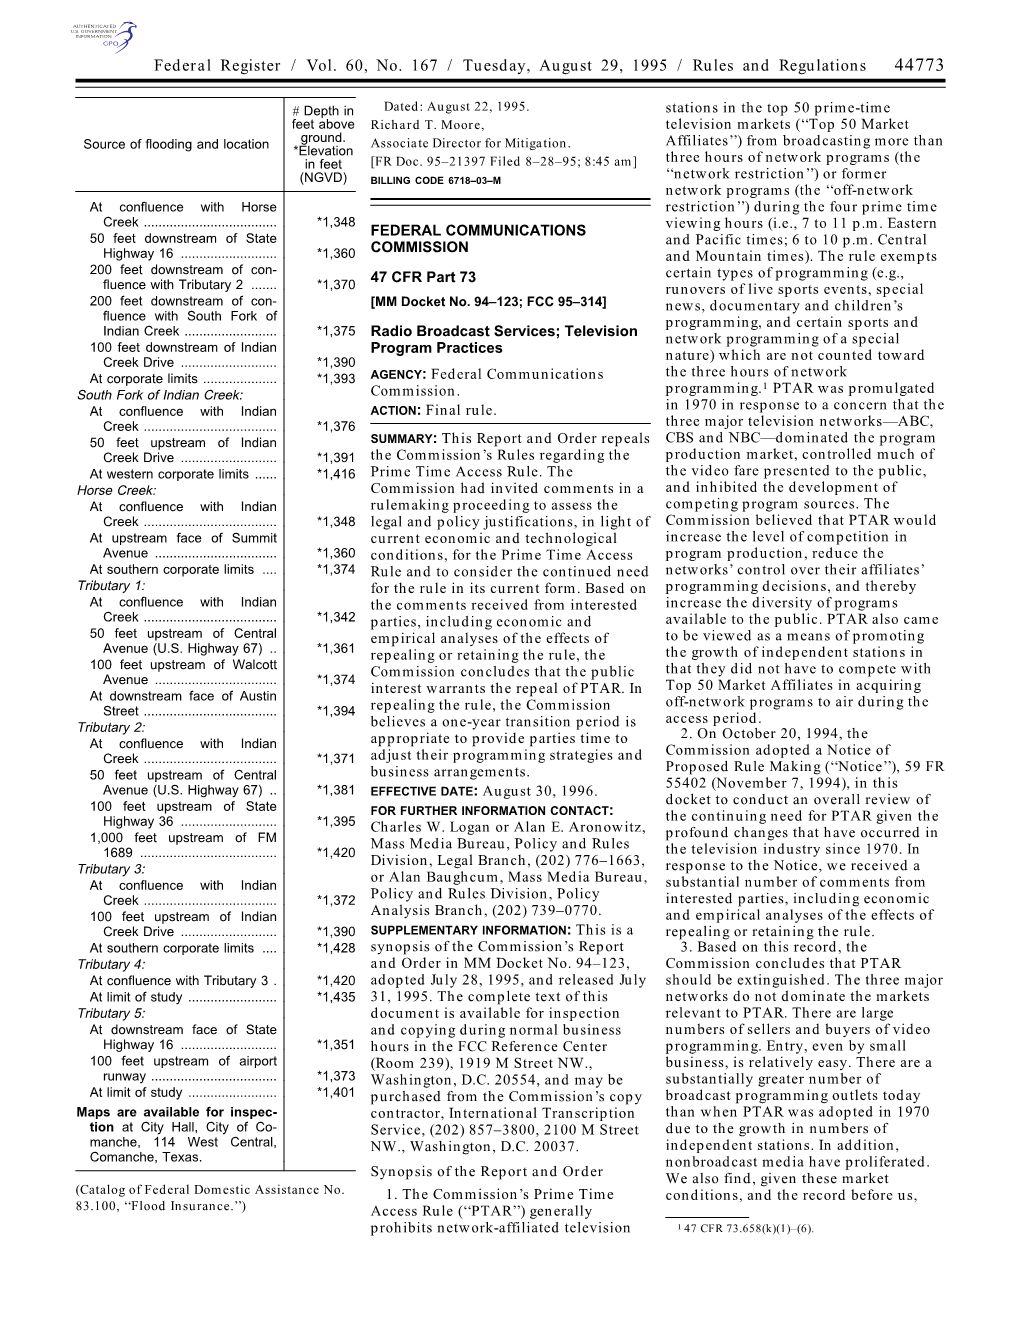 Federal Register / Vol. 60, No. 167 / Tuesday, August 29, 1995 / Rules and Regulations 44773